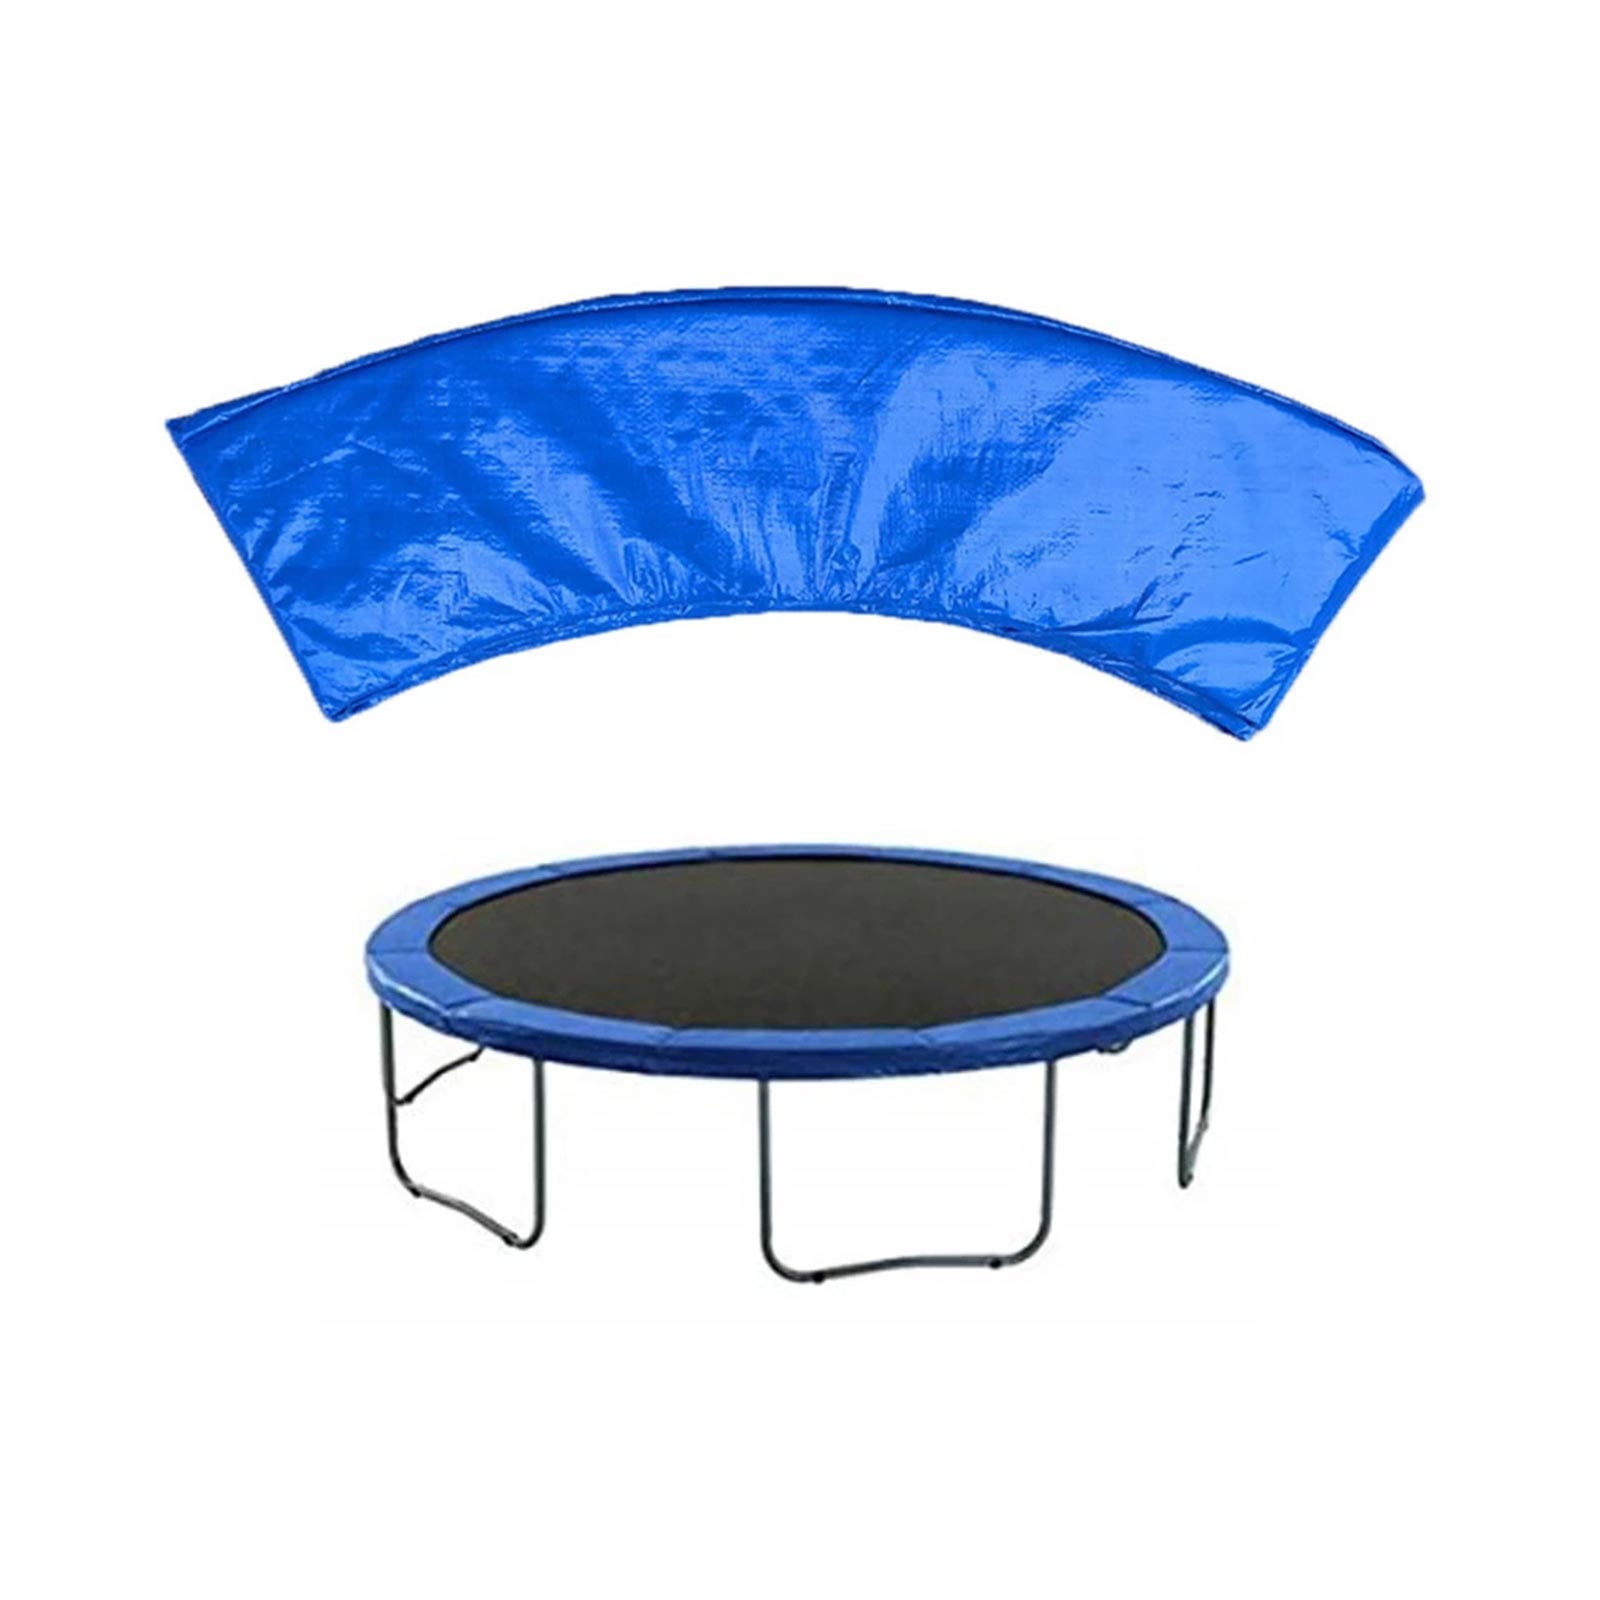 8FT Replacement Trampoline Safety Spring Cover Padding Pad Blue 